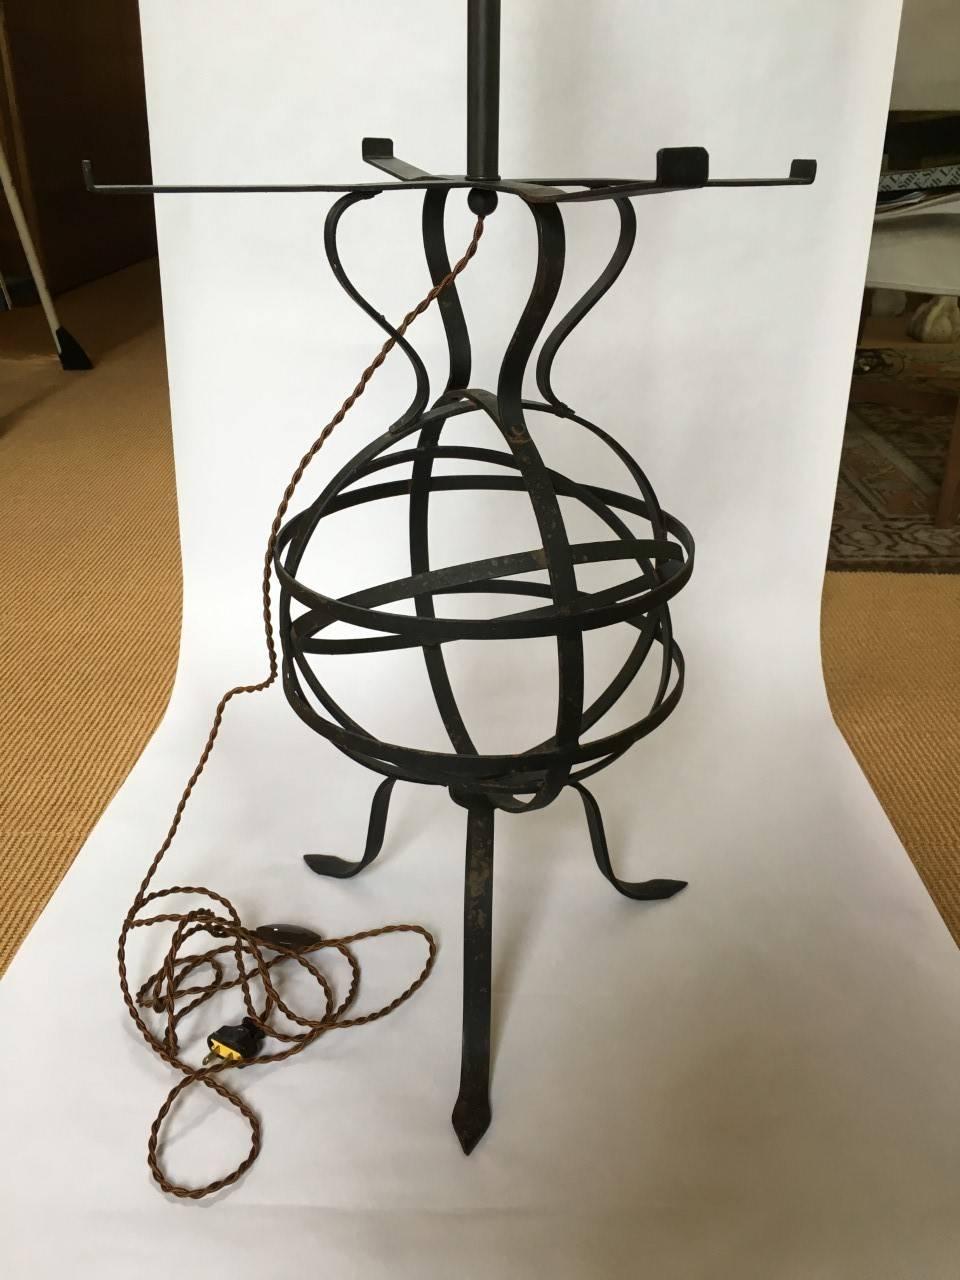 Table lamp, circa 1950.   Strap iron in the form of orb, double cluster light socket newly rewired with silk wrapped cord and cord switch.